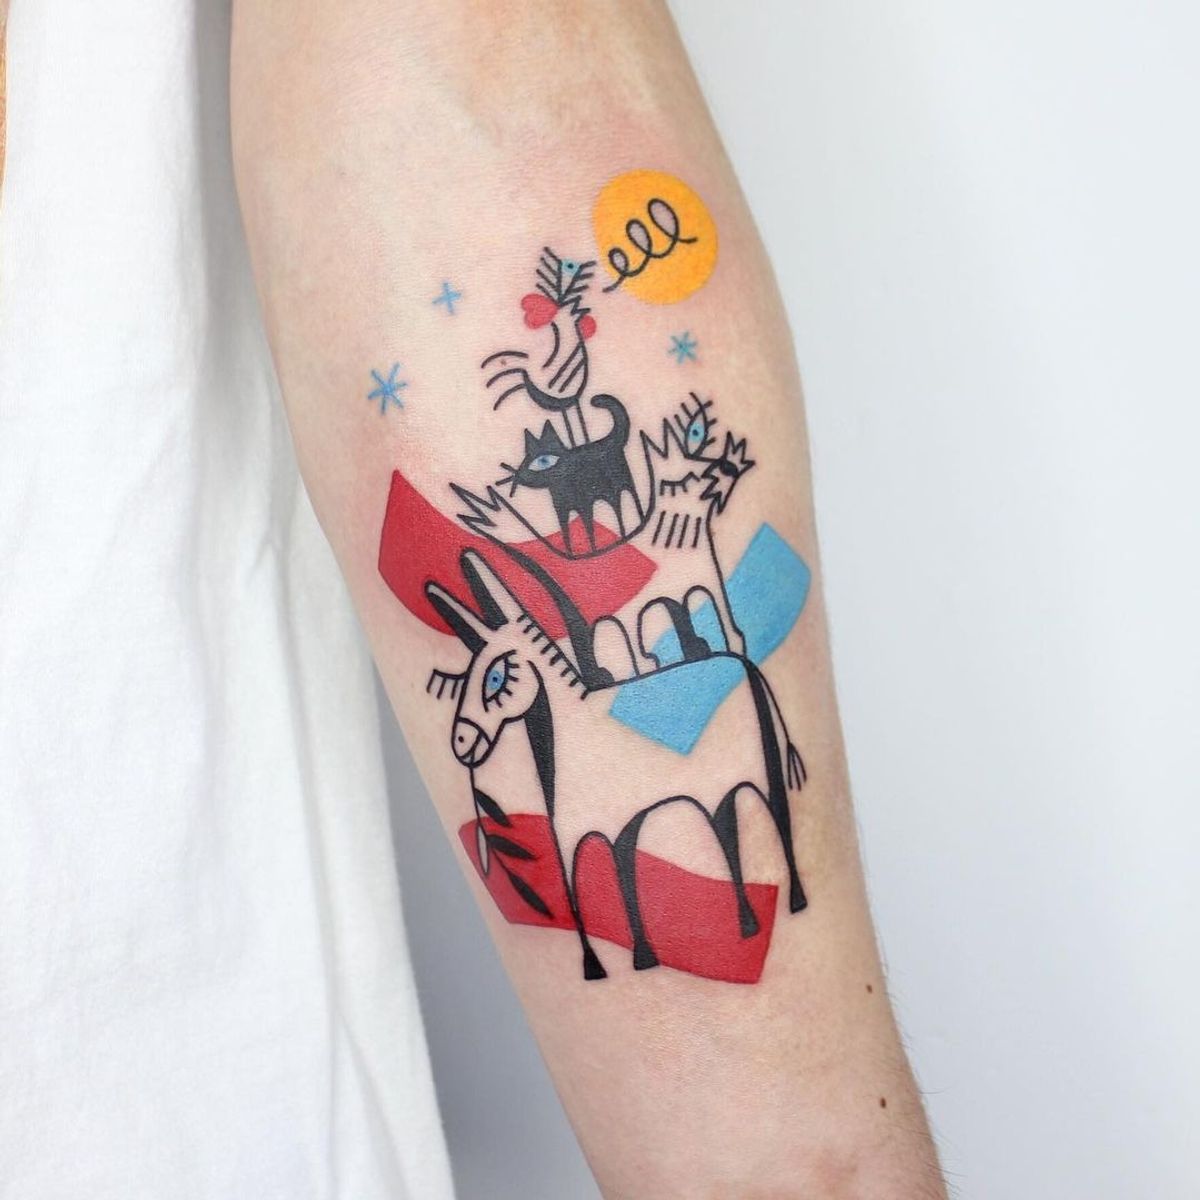 Tattoo uploaded by Justine Morrow • Illustrative tattoo by Yannick NorY ...